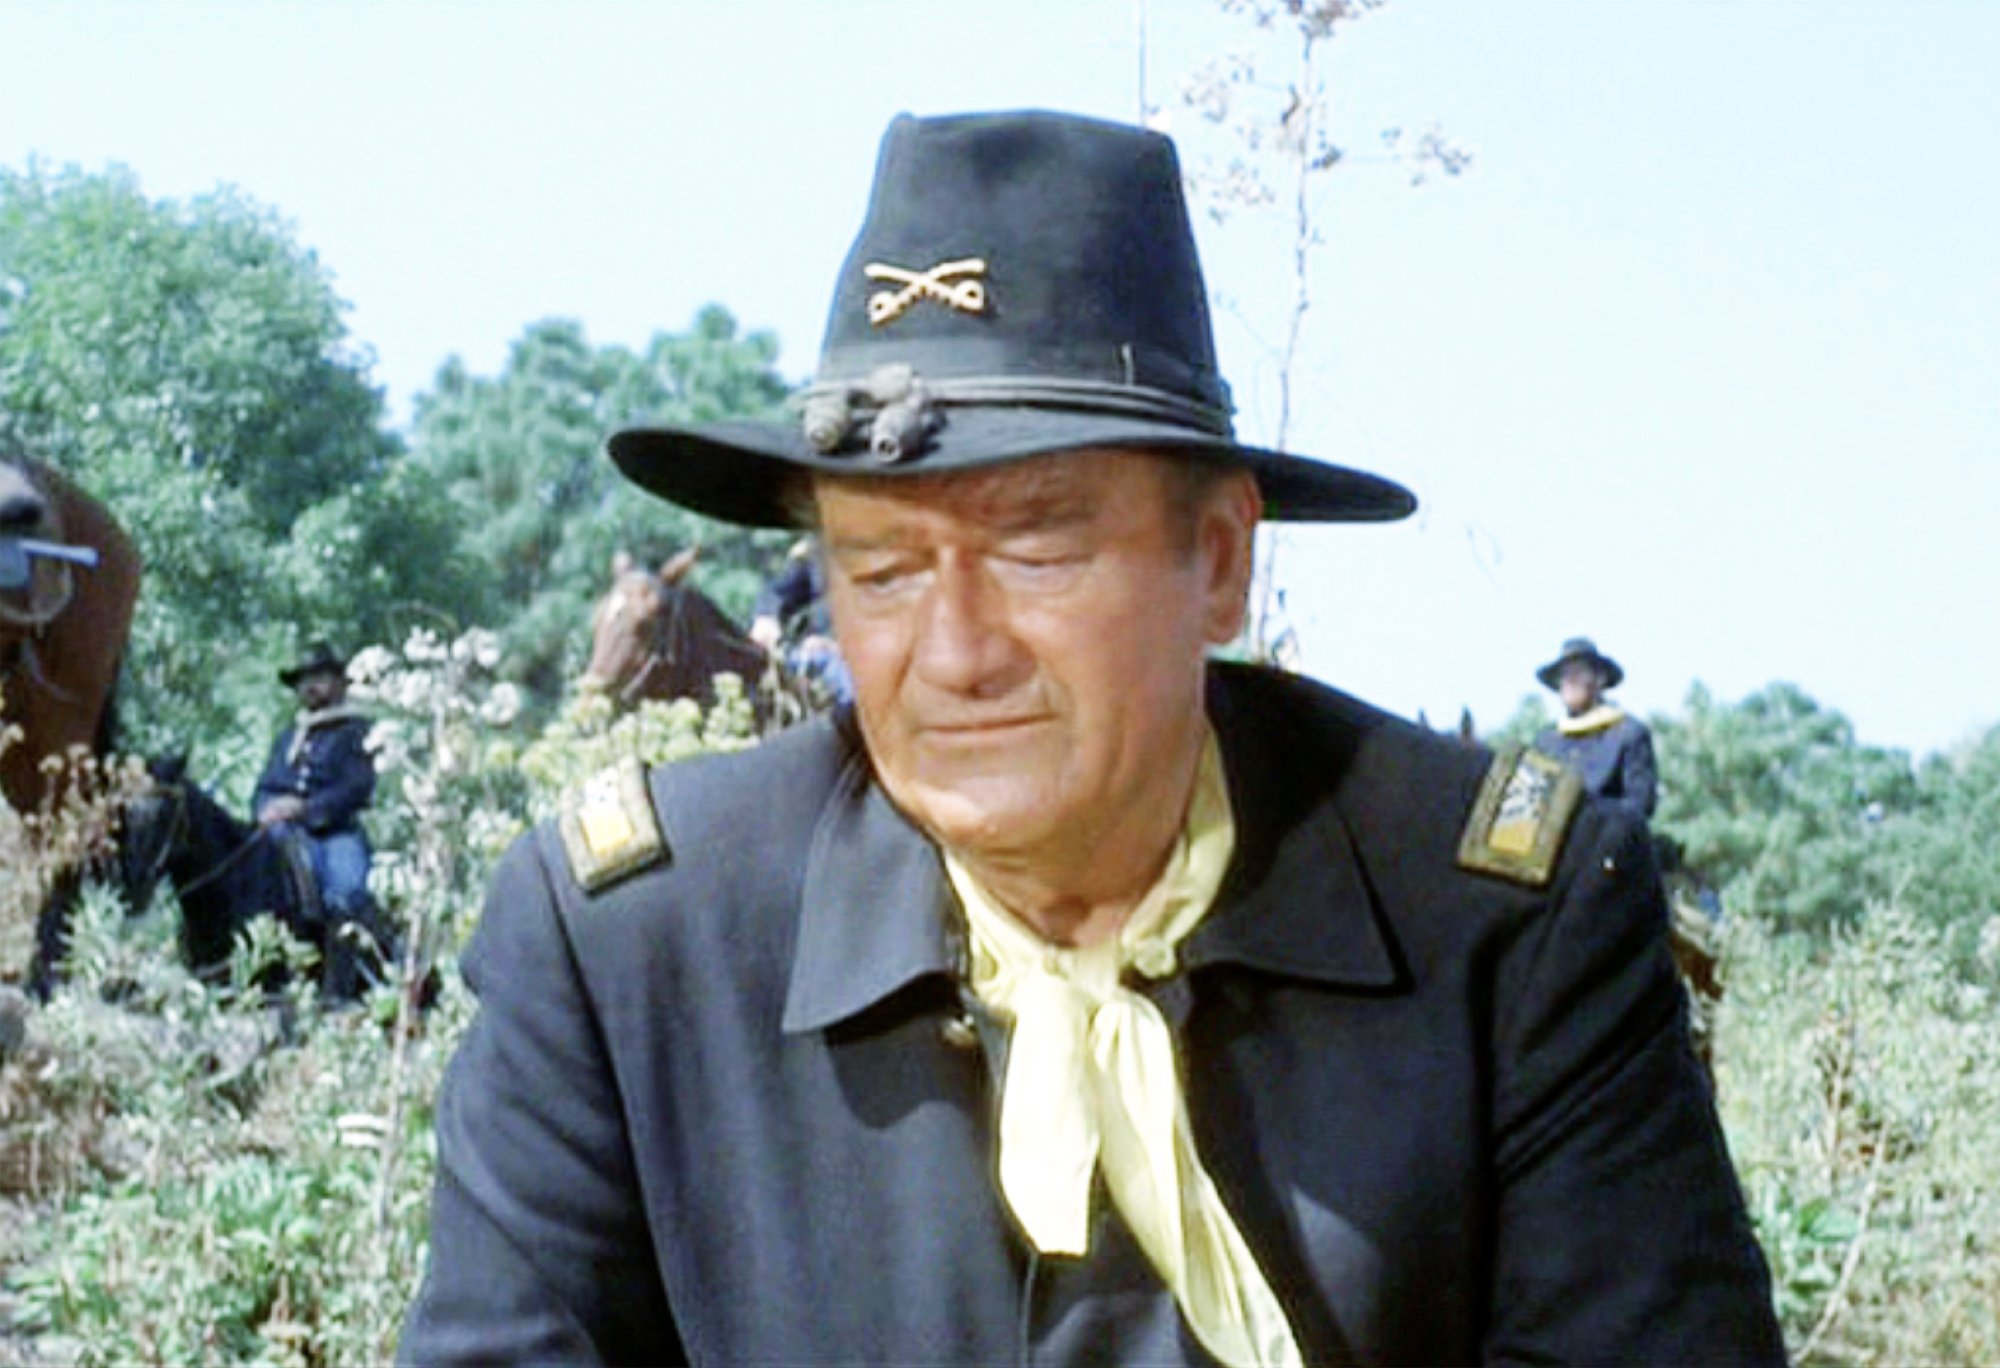 John Wayne as Col. Cord McNally in 'Rio Lobo' in a cowboy outfit looking down at the ground, who's real mom was Mary 'Molly' Alberta Brown